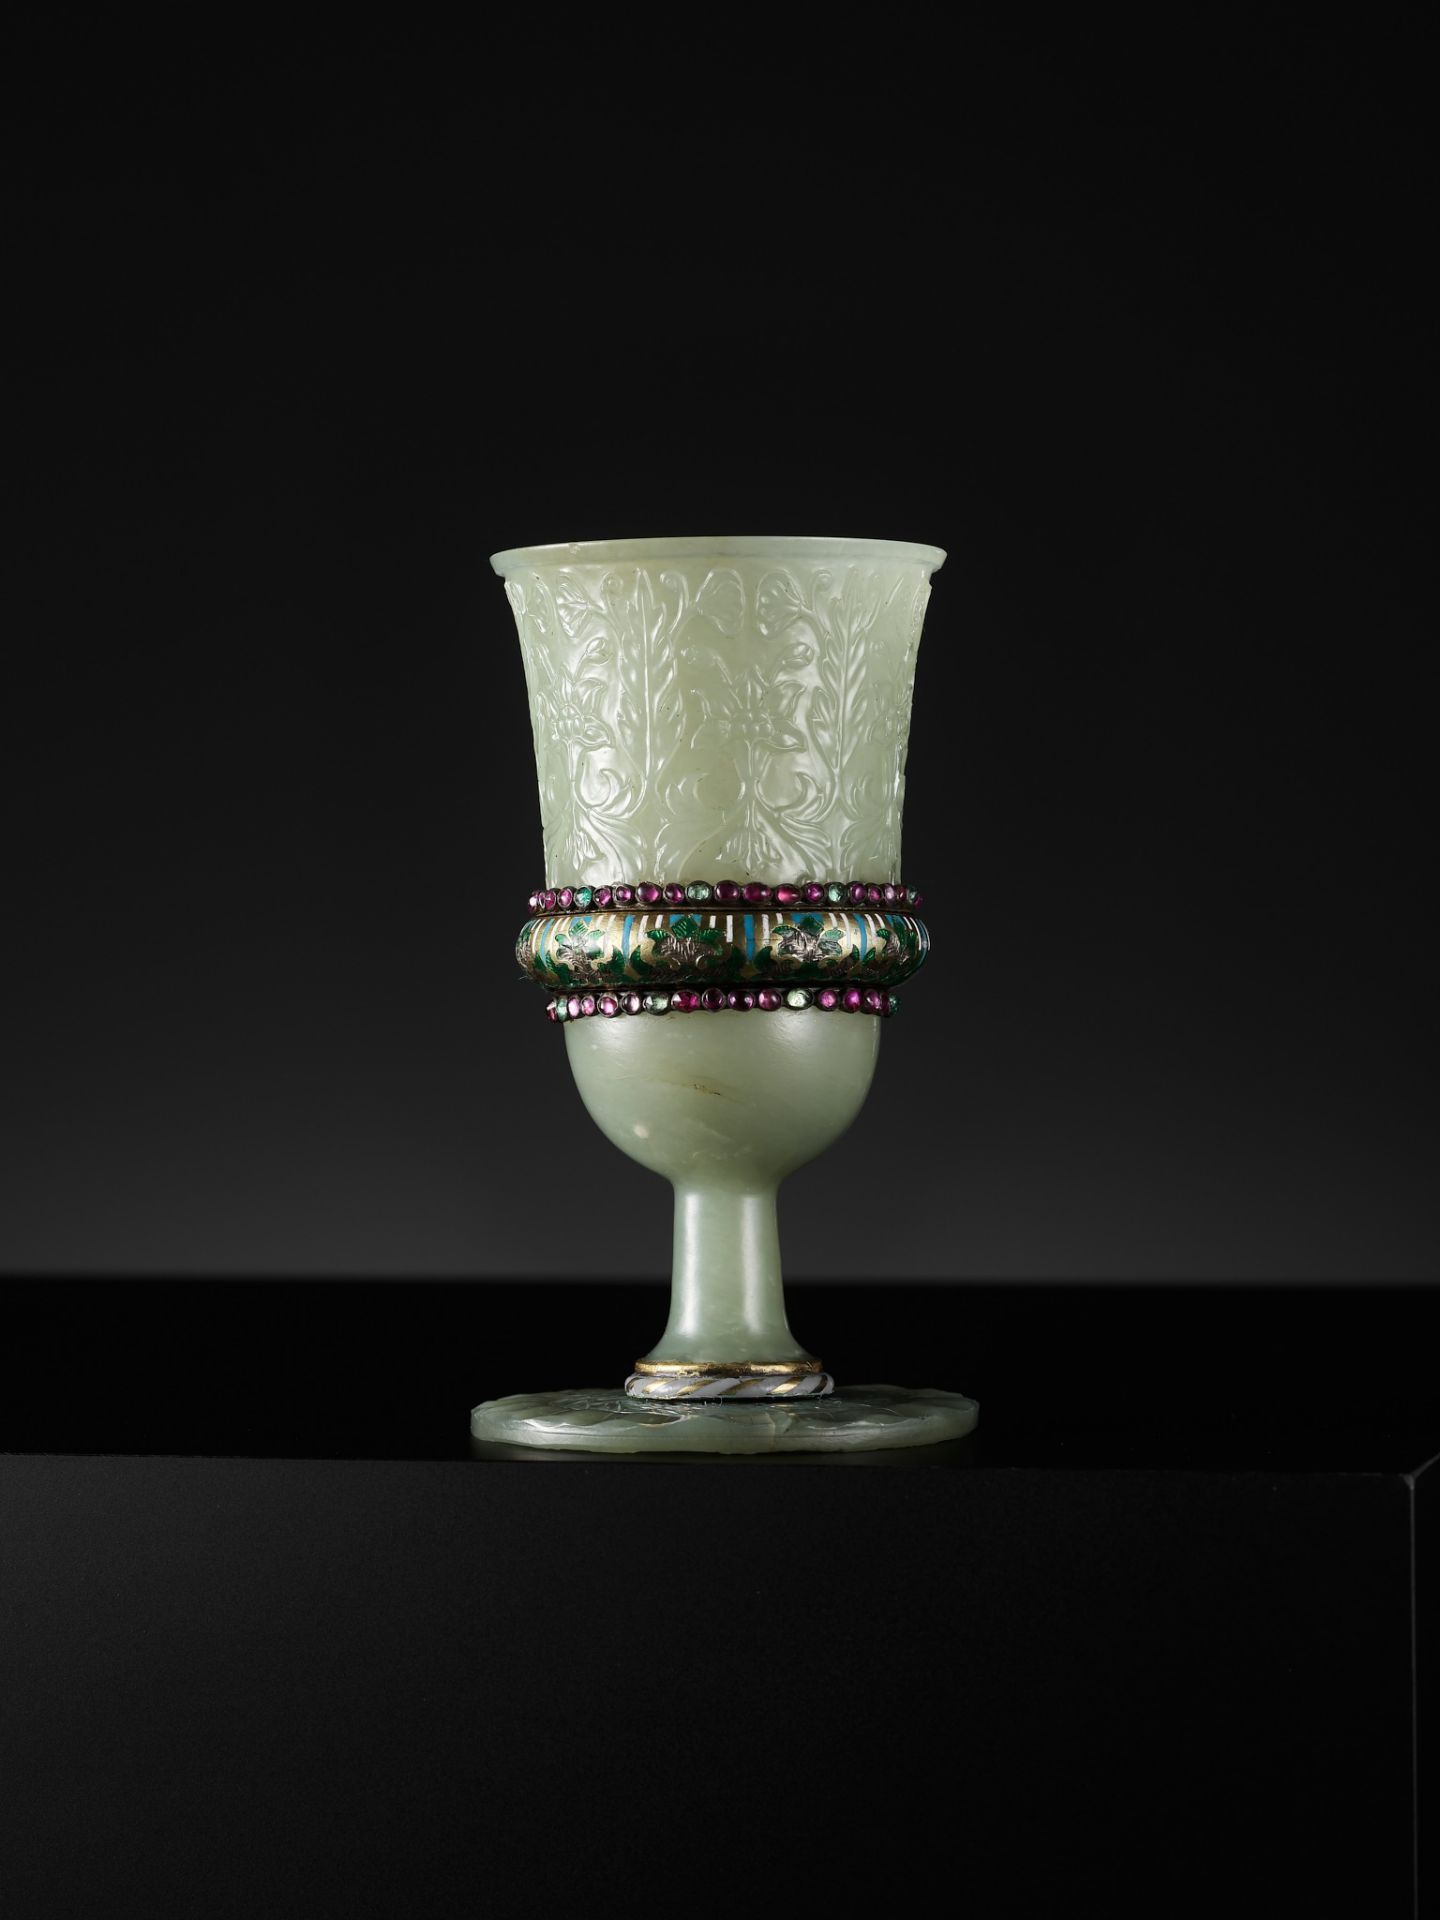 A MUGHAL GILT AND 'GEM'-INLAID JADE STEM CUP, INDIA, 18TH CENTURY - Image 7 of 11